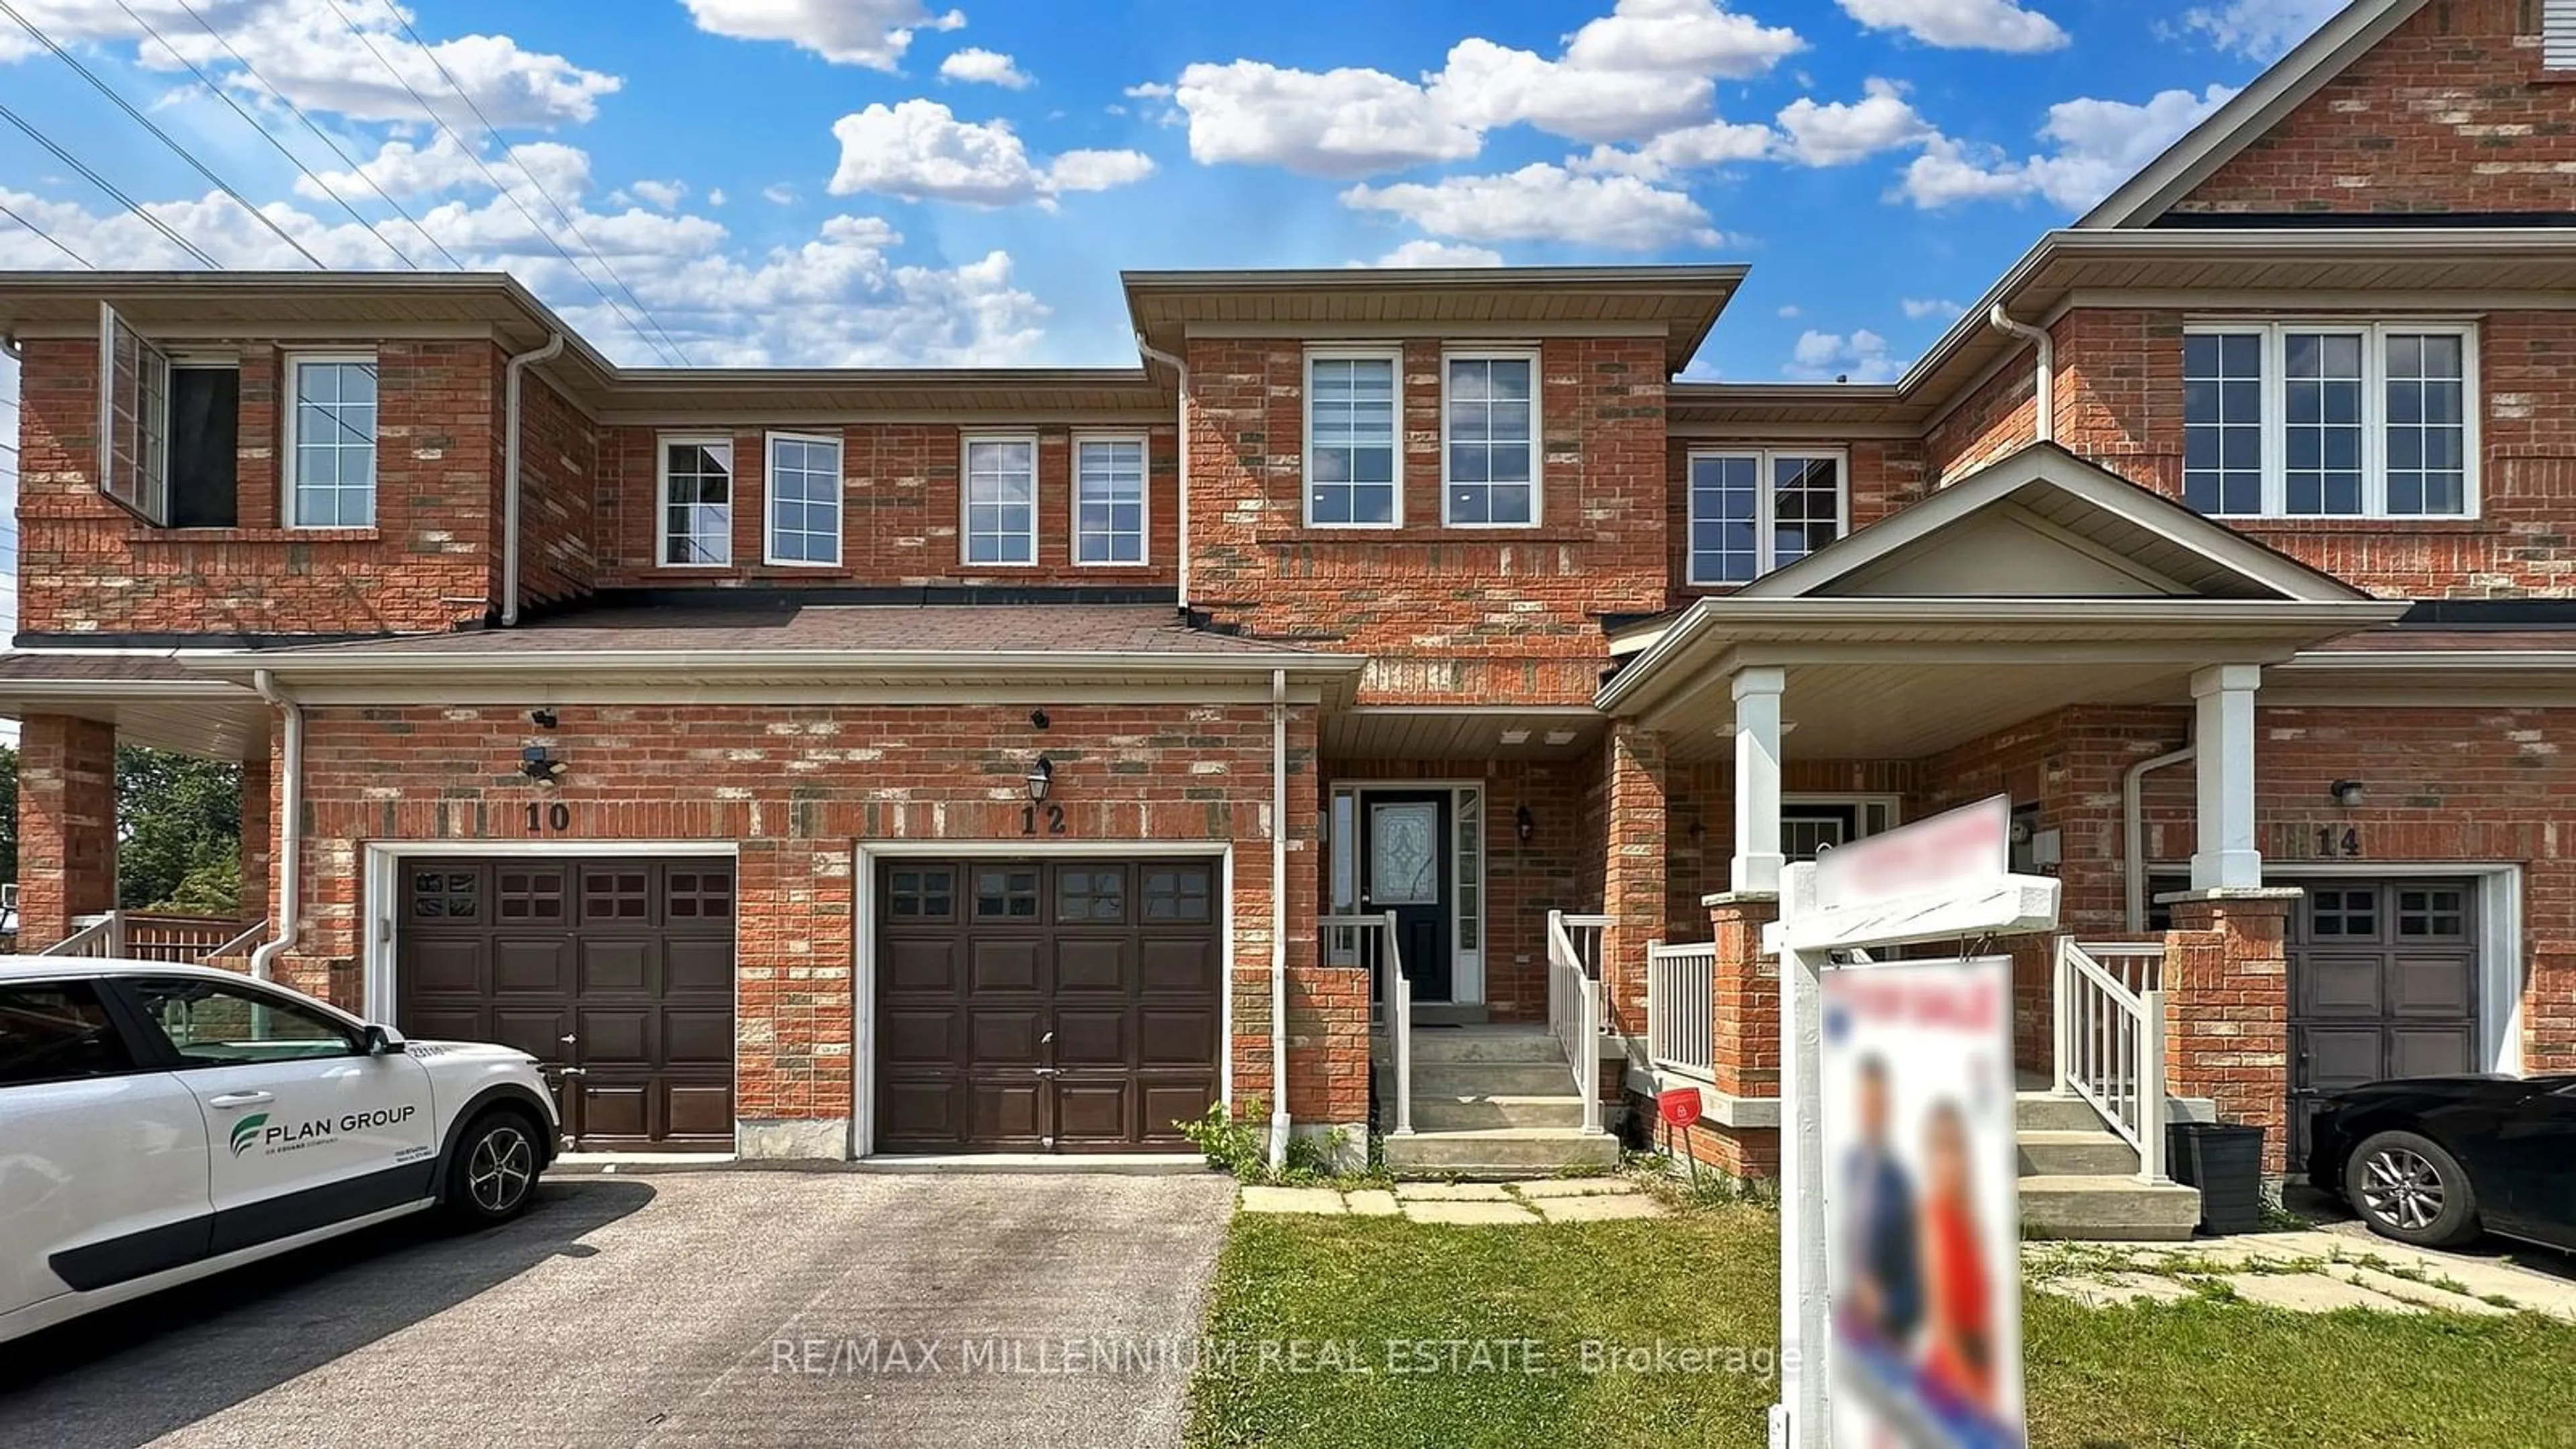 Home with brick exterior material for 12 Michaelman Rd, Ajax Ontario L1S 0C9